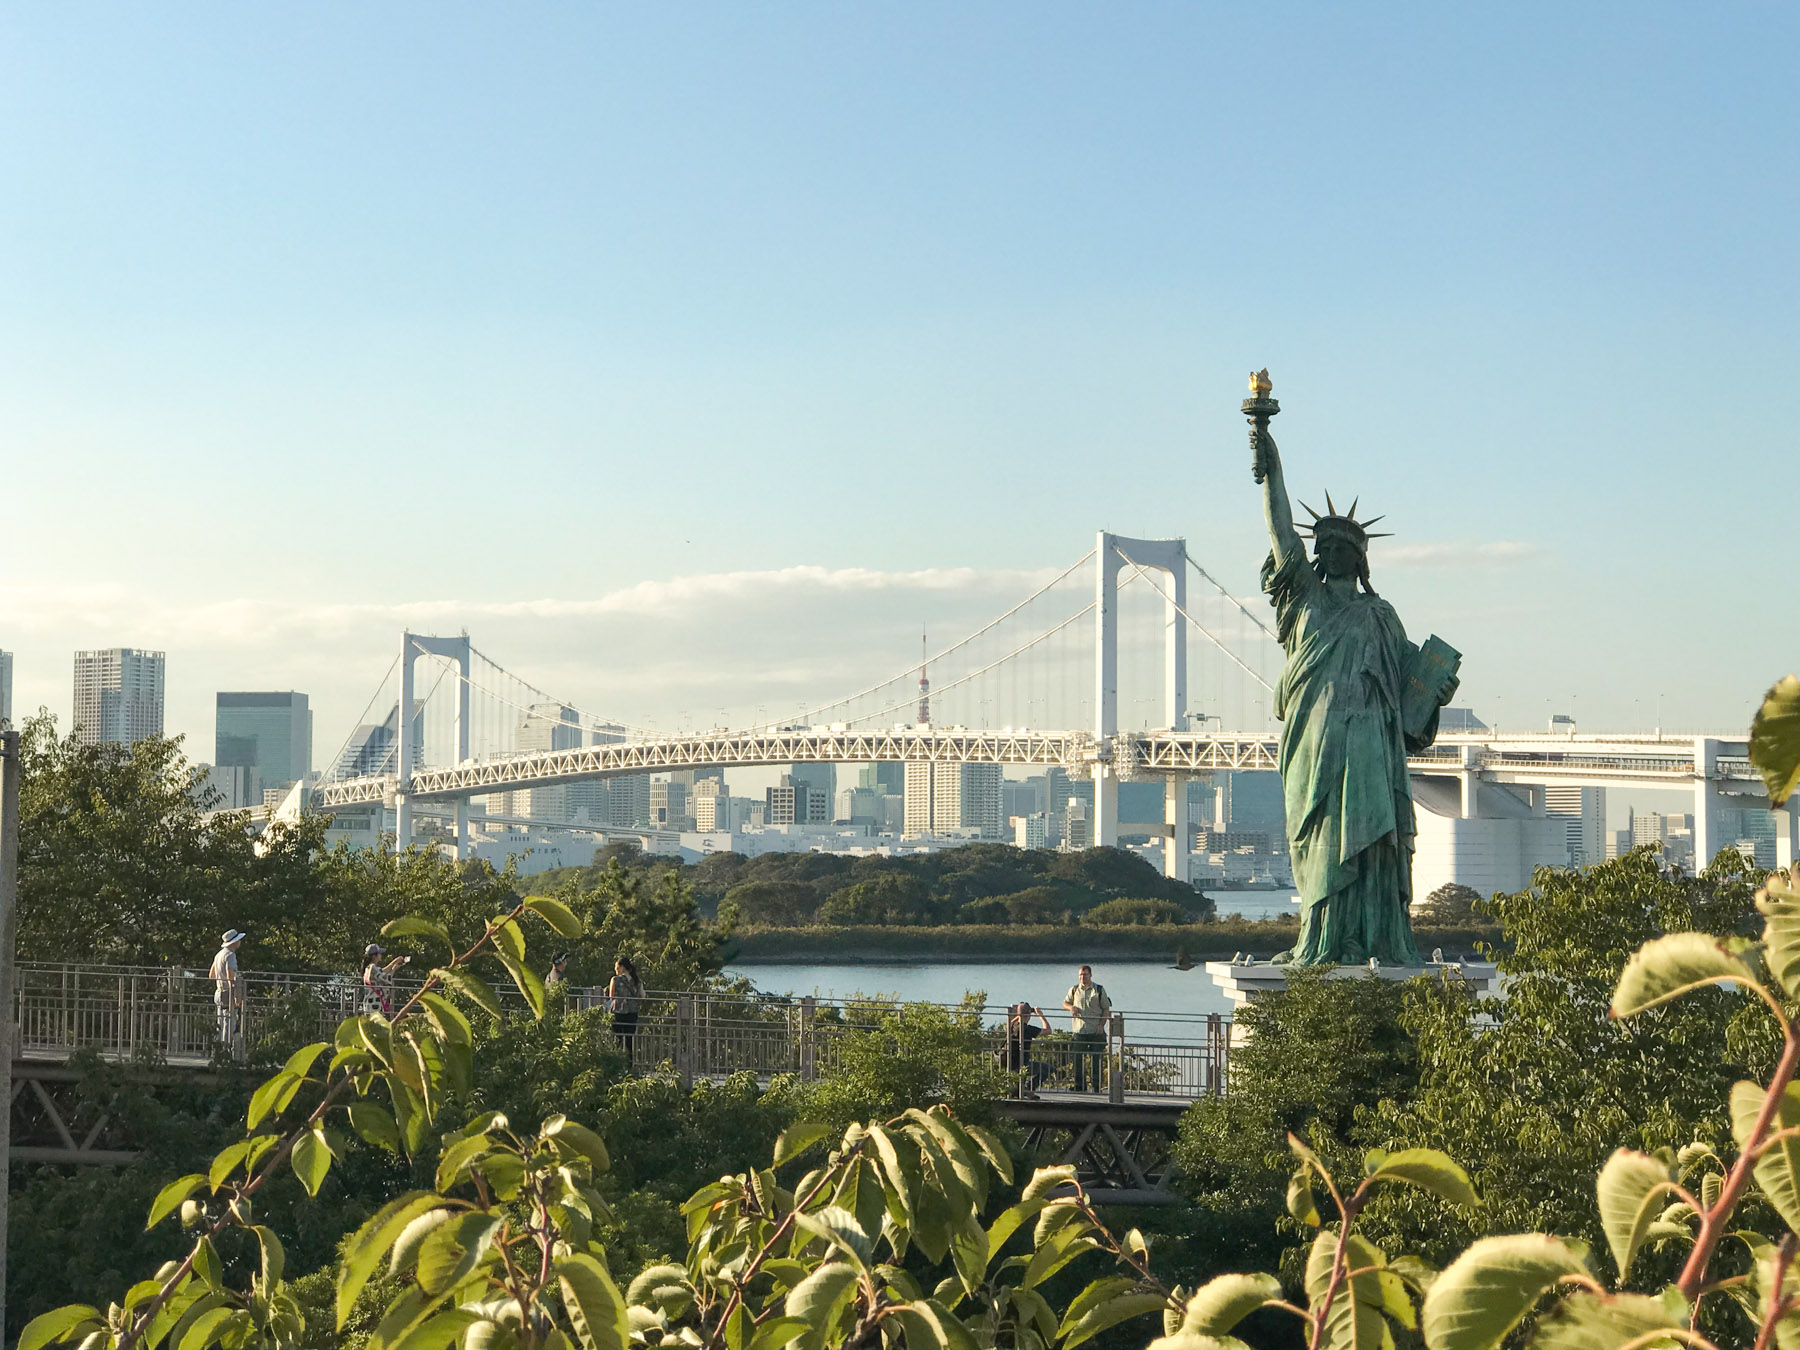 The Statue of Liberty in the Odaiba area in Tokyo